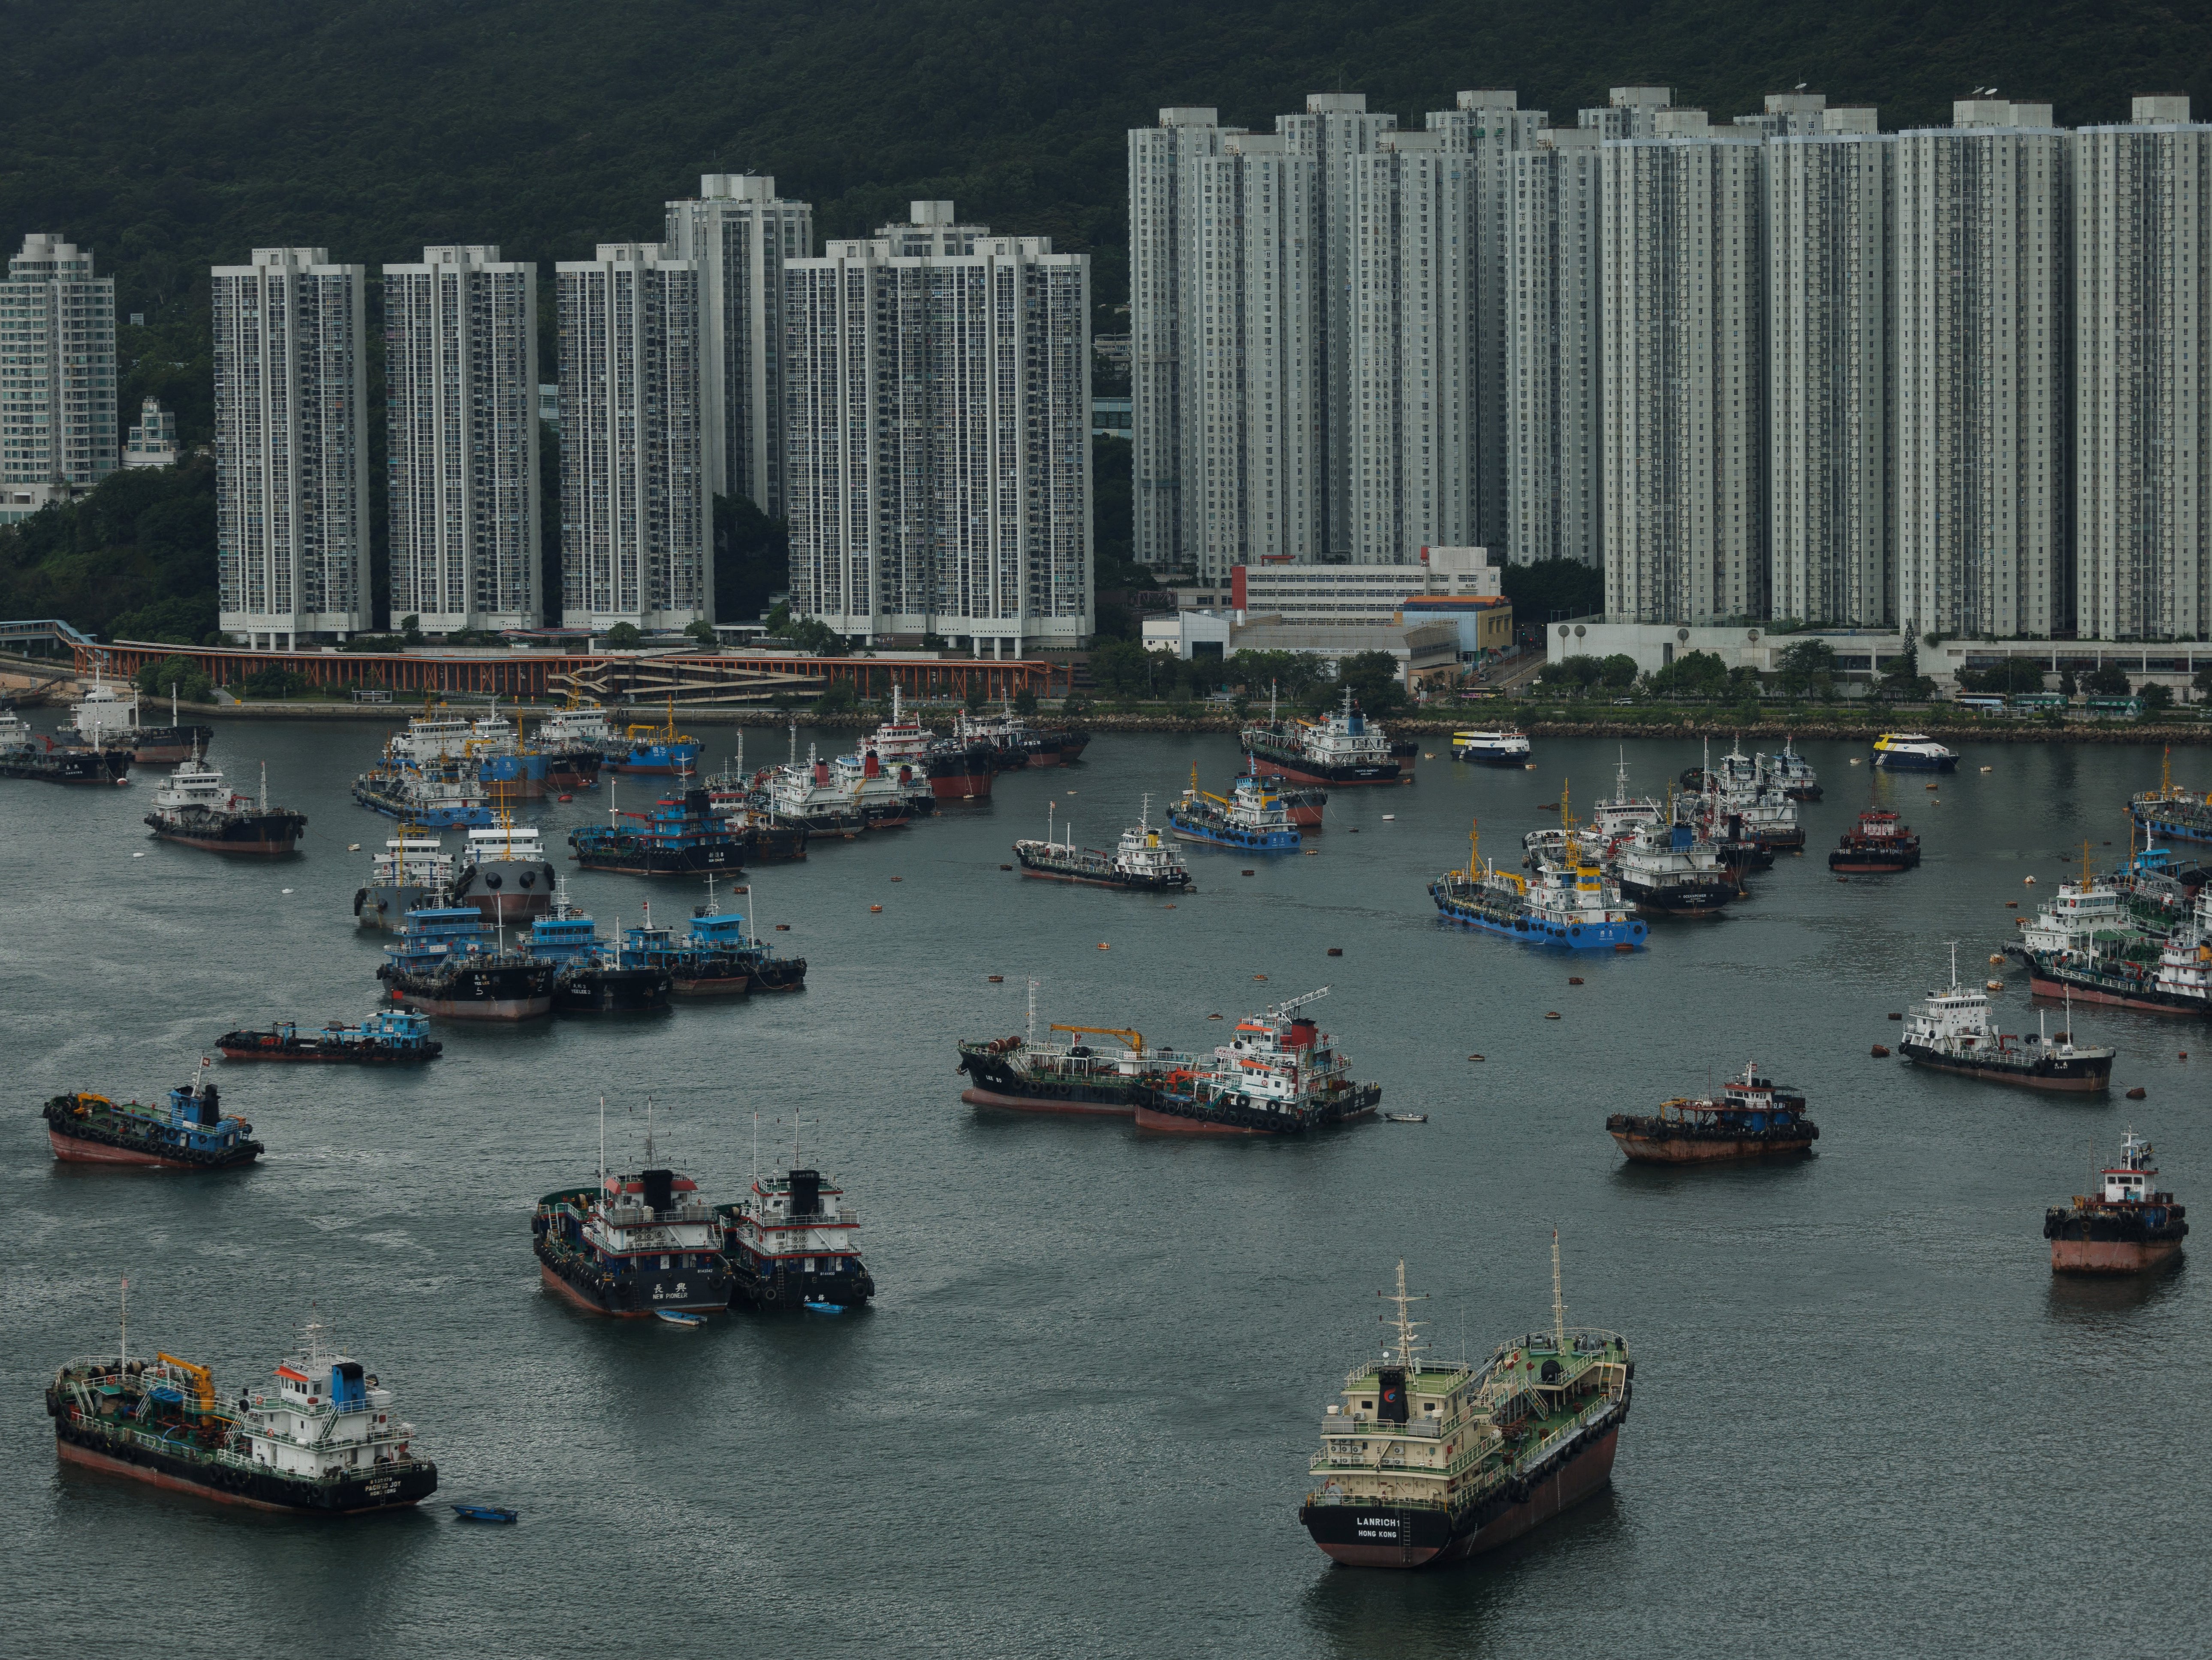 Boats are parked at a typhoon shelter in Tseun Wan as a precaution for the approaching Typhoon Talim in Hong Kong on 16 July 2023